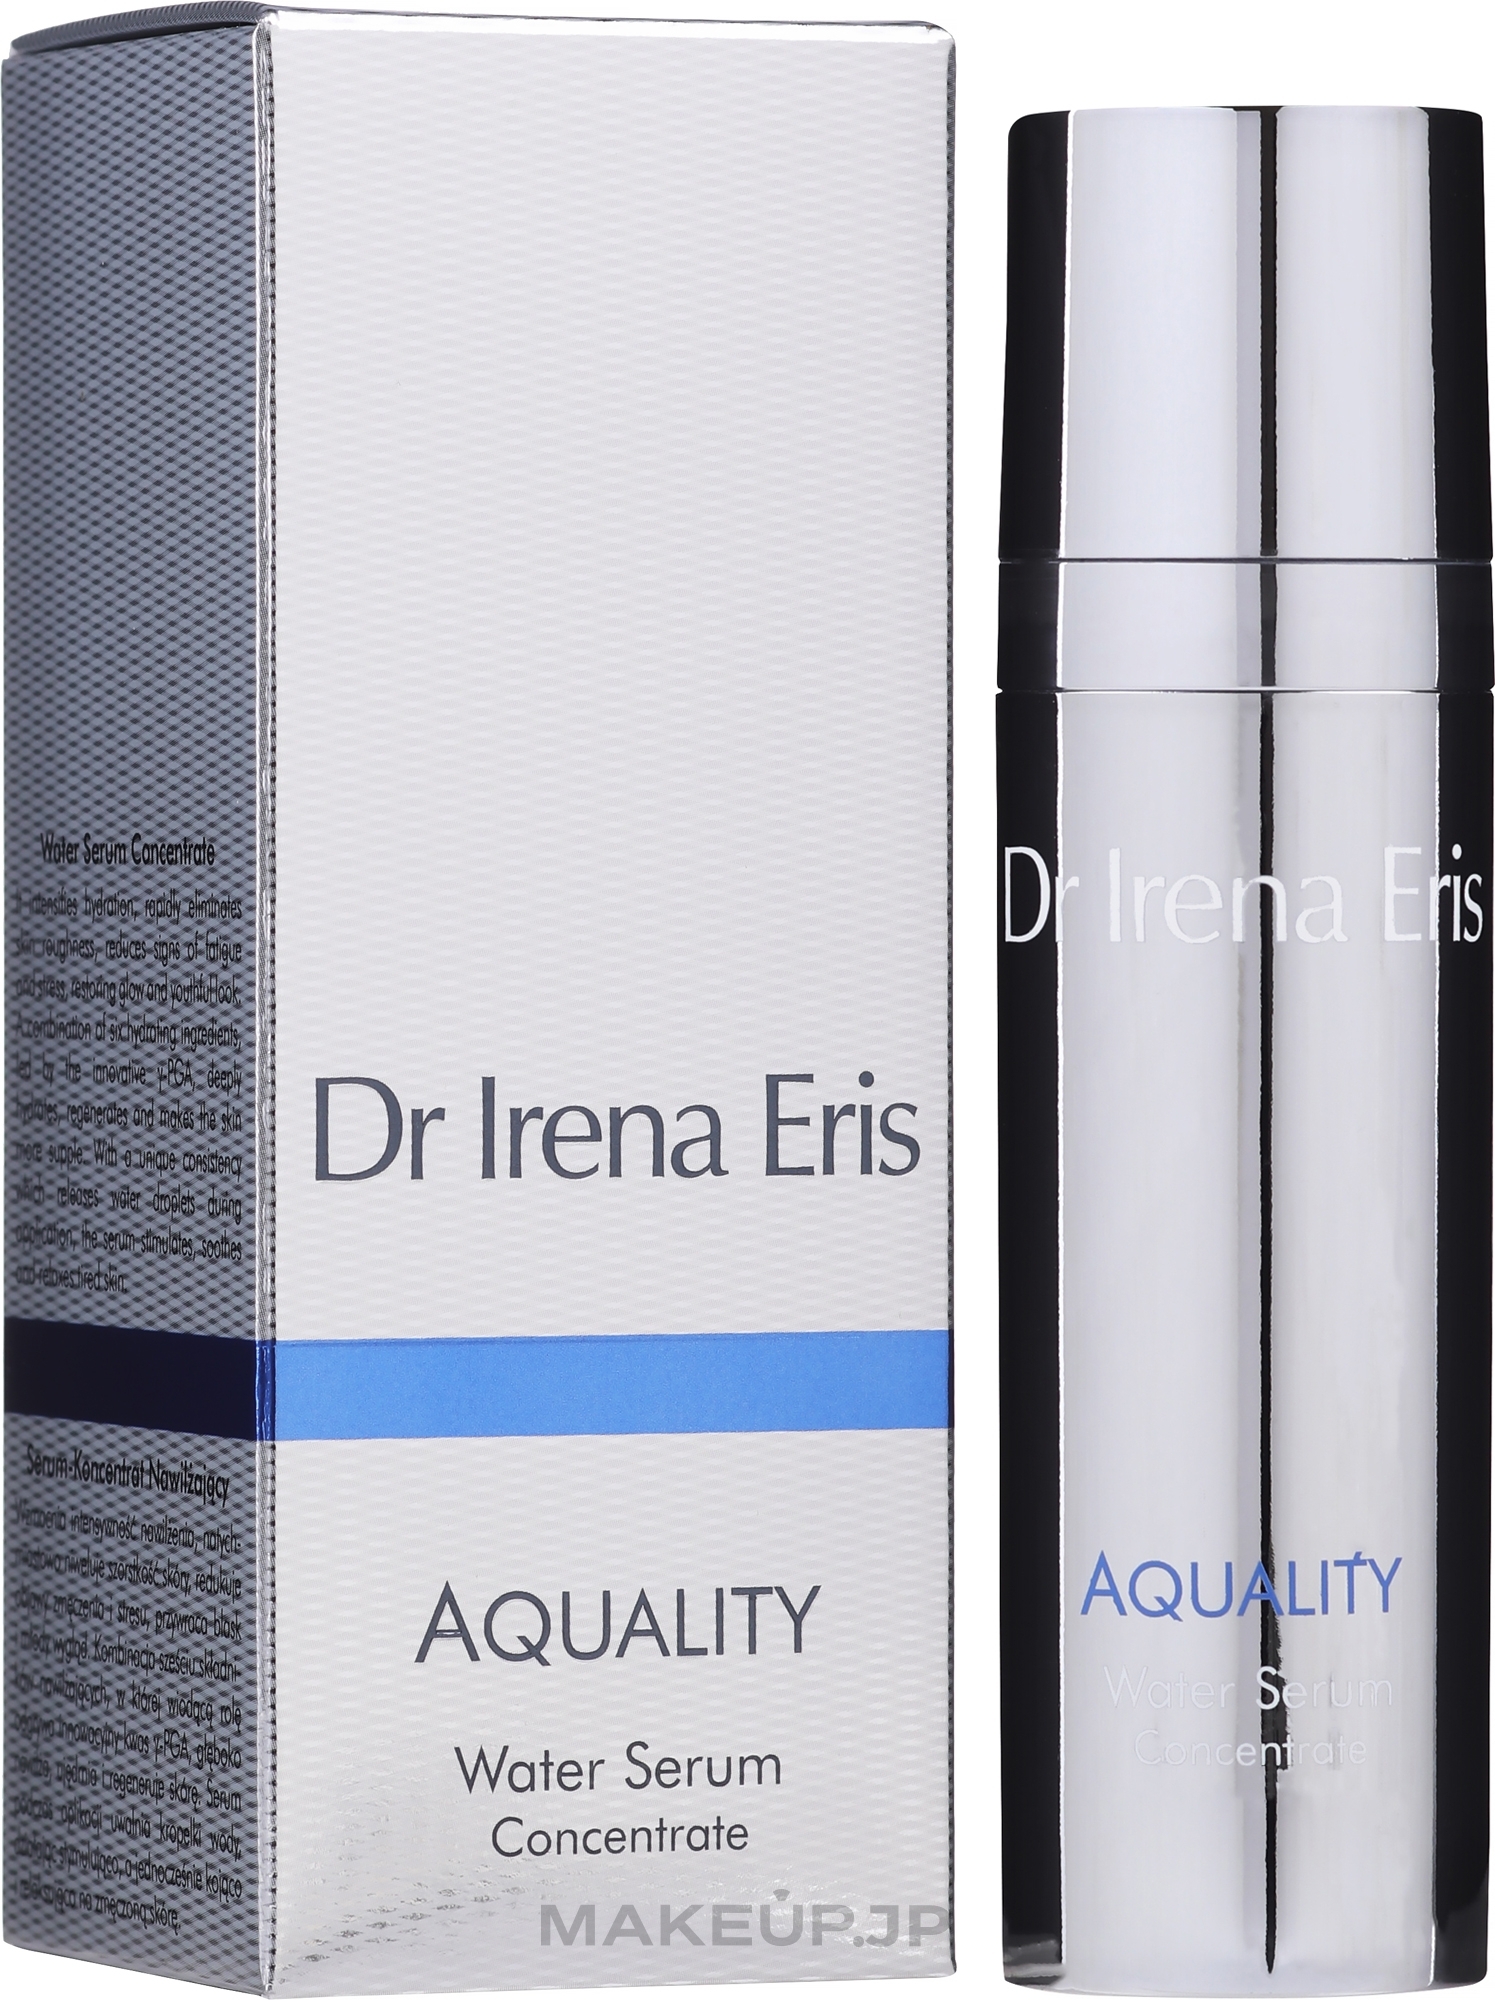 Aquality Water Serum Concentrate - Dr Irena Eris  — photo 30 ml